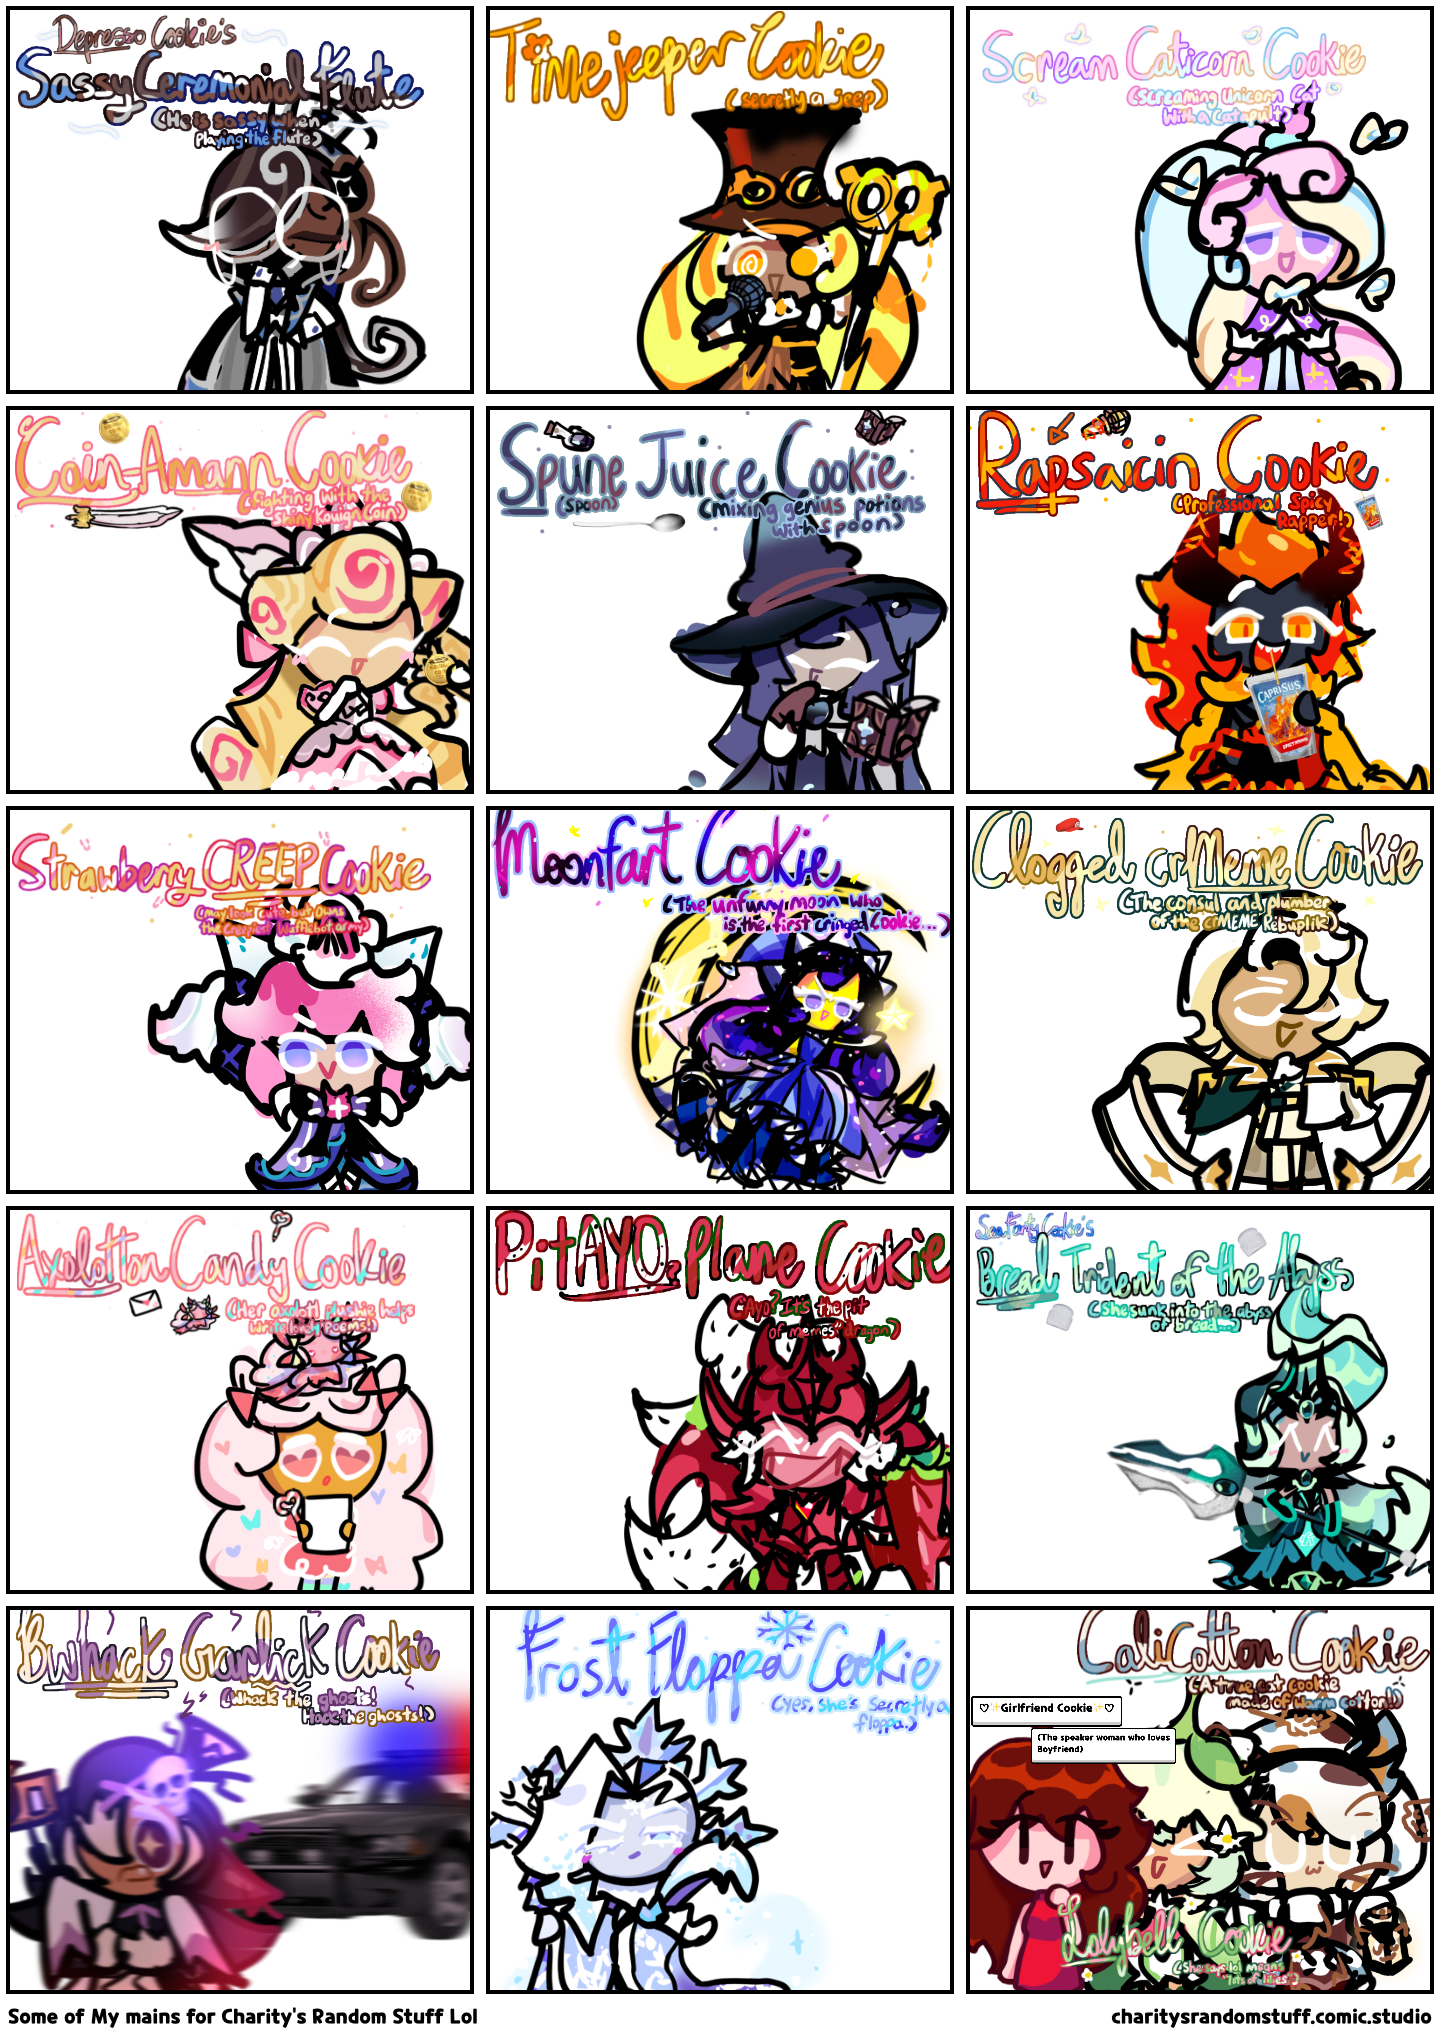 Some of My mains for Charity's Random Stuff Lol